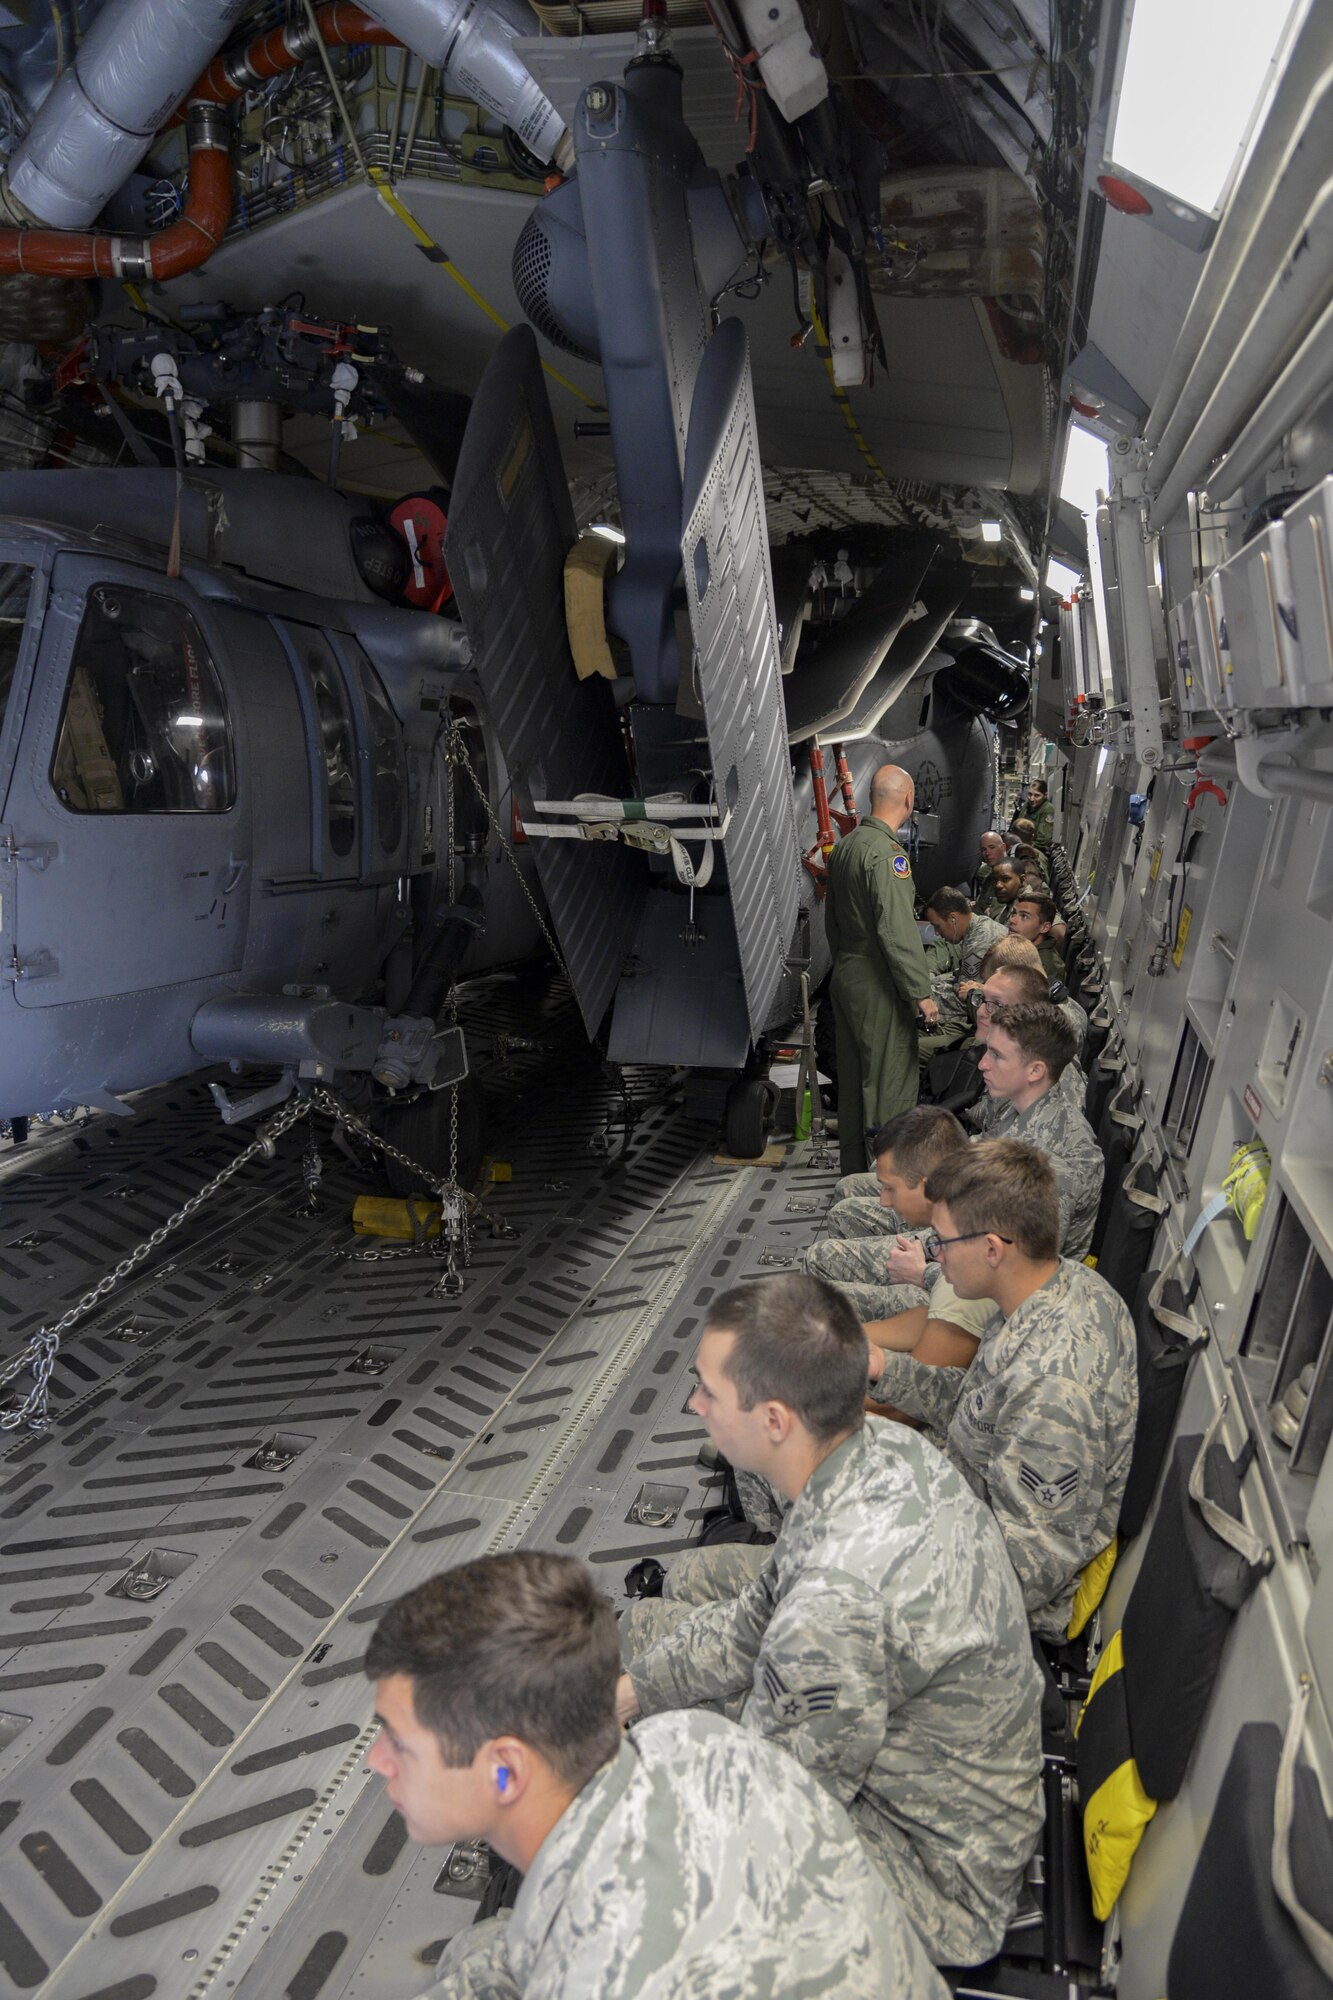 Members of the 38th Rescue Squadron and 723d Aircraft Maintenance Squadron, 41st Helicopter Maintenance Unit, both from Moody Air Force Base, Ga., prepare for takeoff May 15, 2017, aboard a 3d Airlift Squadron C-17 at Moody AFB, Ga. Two HH-60G Pave Hawk search and rescue helicopters and 40 members assigned to Moody AFB flew to Langley AFB, Va., to participate in Exercise RAPID RESCUE May 17. (U.S. Air Force photo by Senior Airman Aaron J. Jenne)